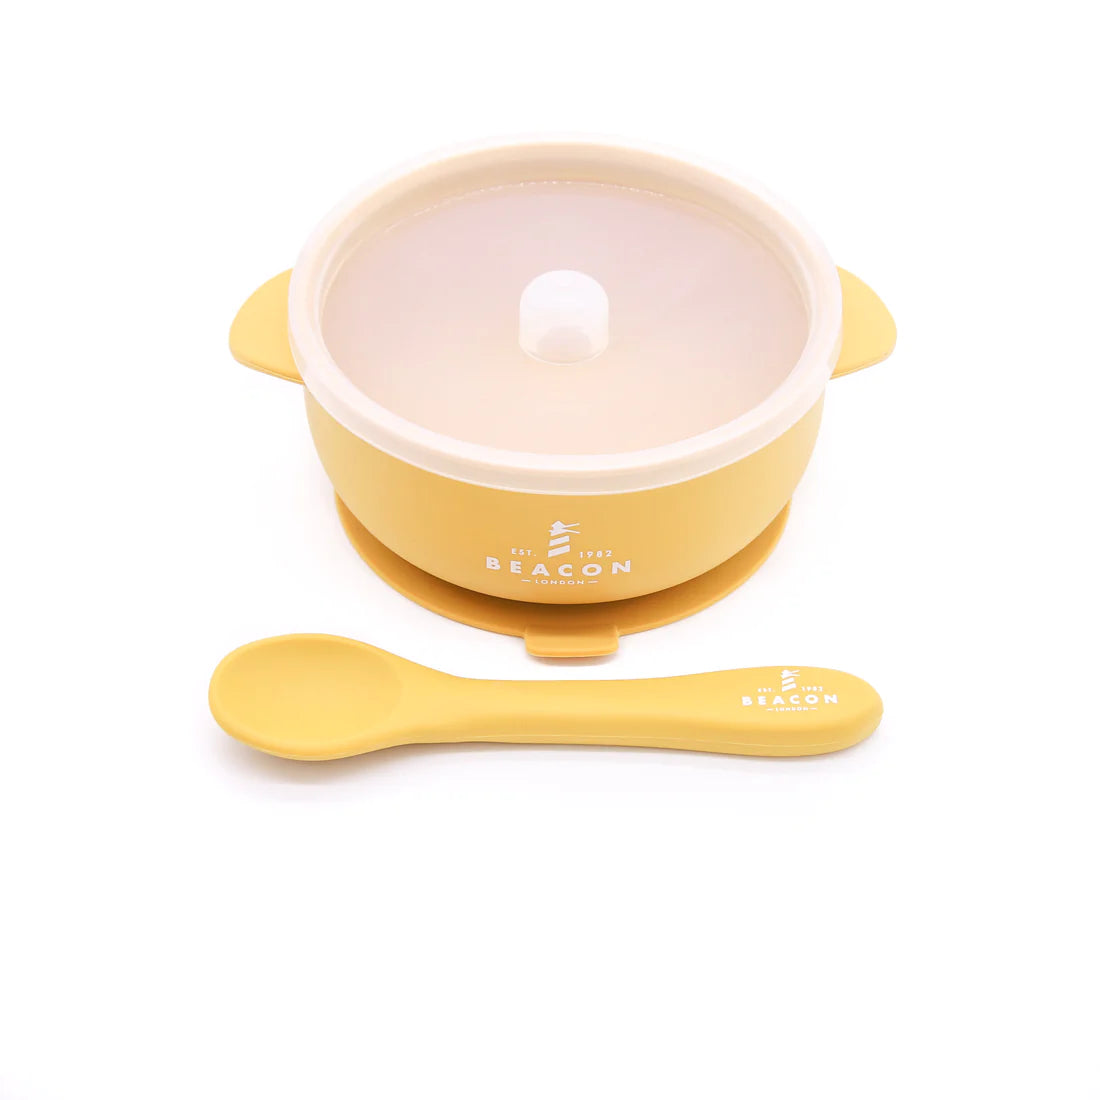 Silicone Suction Bowl & Spoon-Bowls-Second Snuggle Preloved